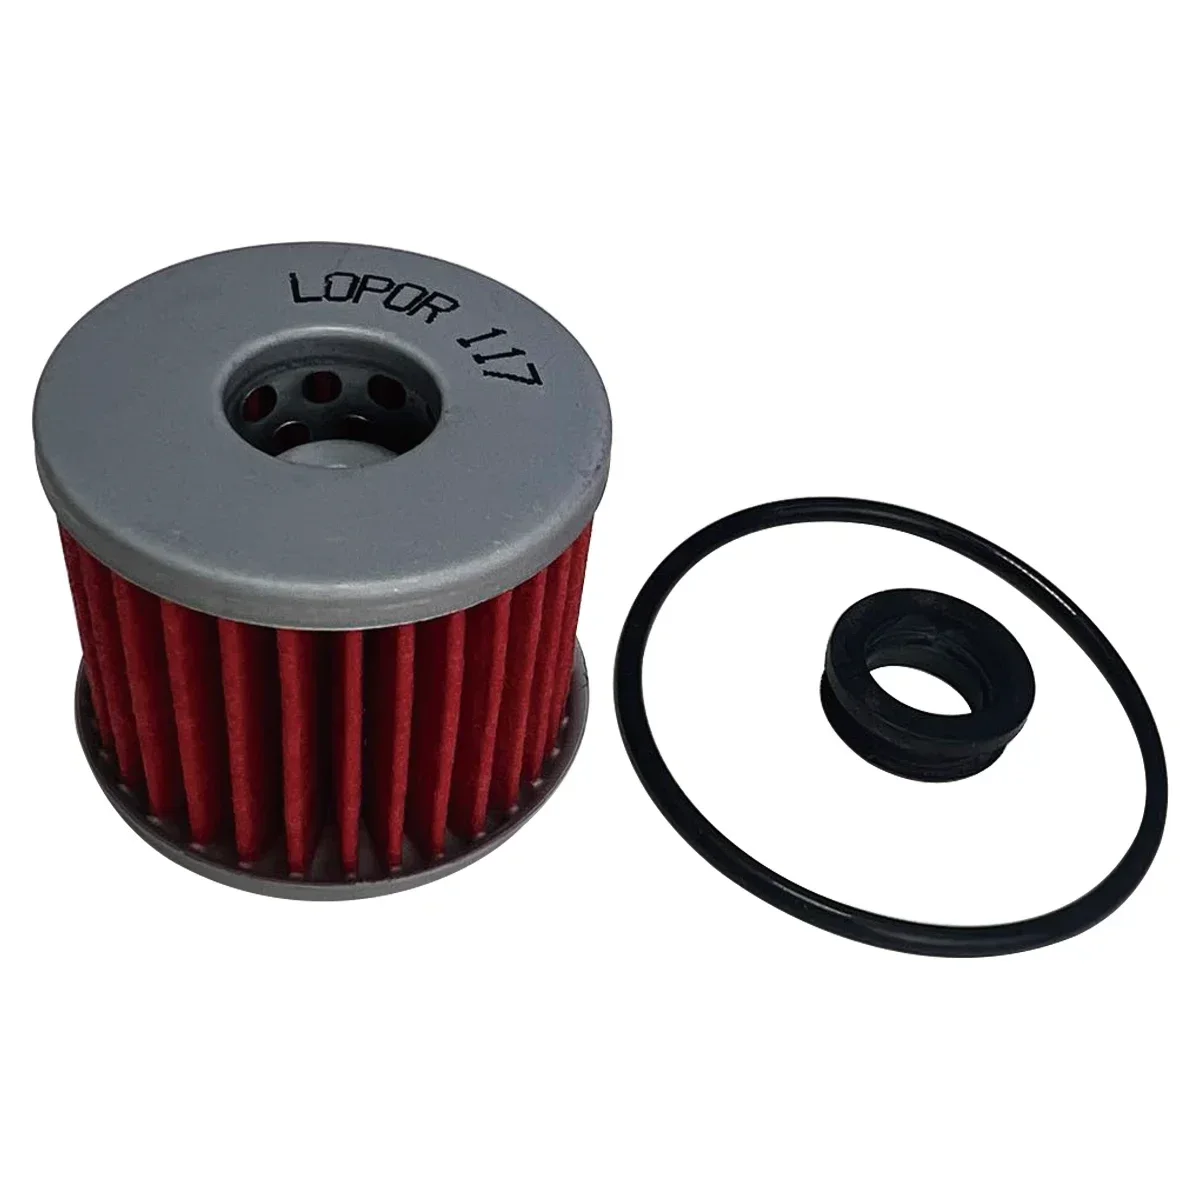 Motorcycle Oil Filter For Honda Scooter C125 A Super Cub 700 Integra NSS750 M Forza DCT 750 Integra NC750 X-ADV 750 ADV750 HF117 balance shock front fork brace for honda nc700 nc750 s x dct ctx700 n d dct 2012 2018 motorcycle accessories aluminum bracket